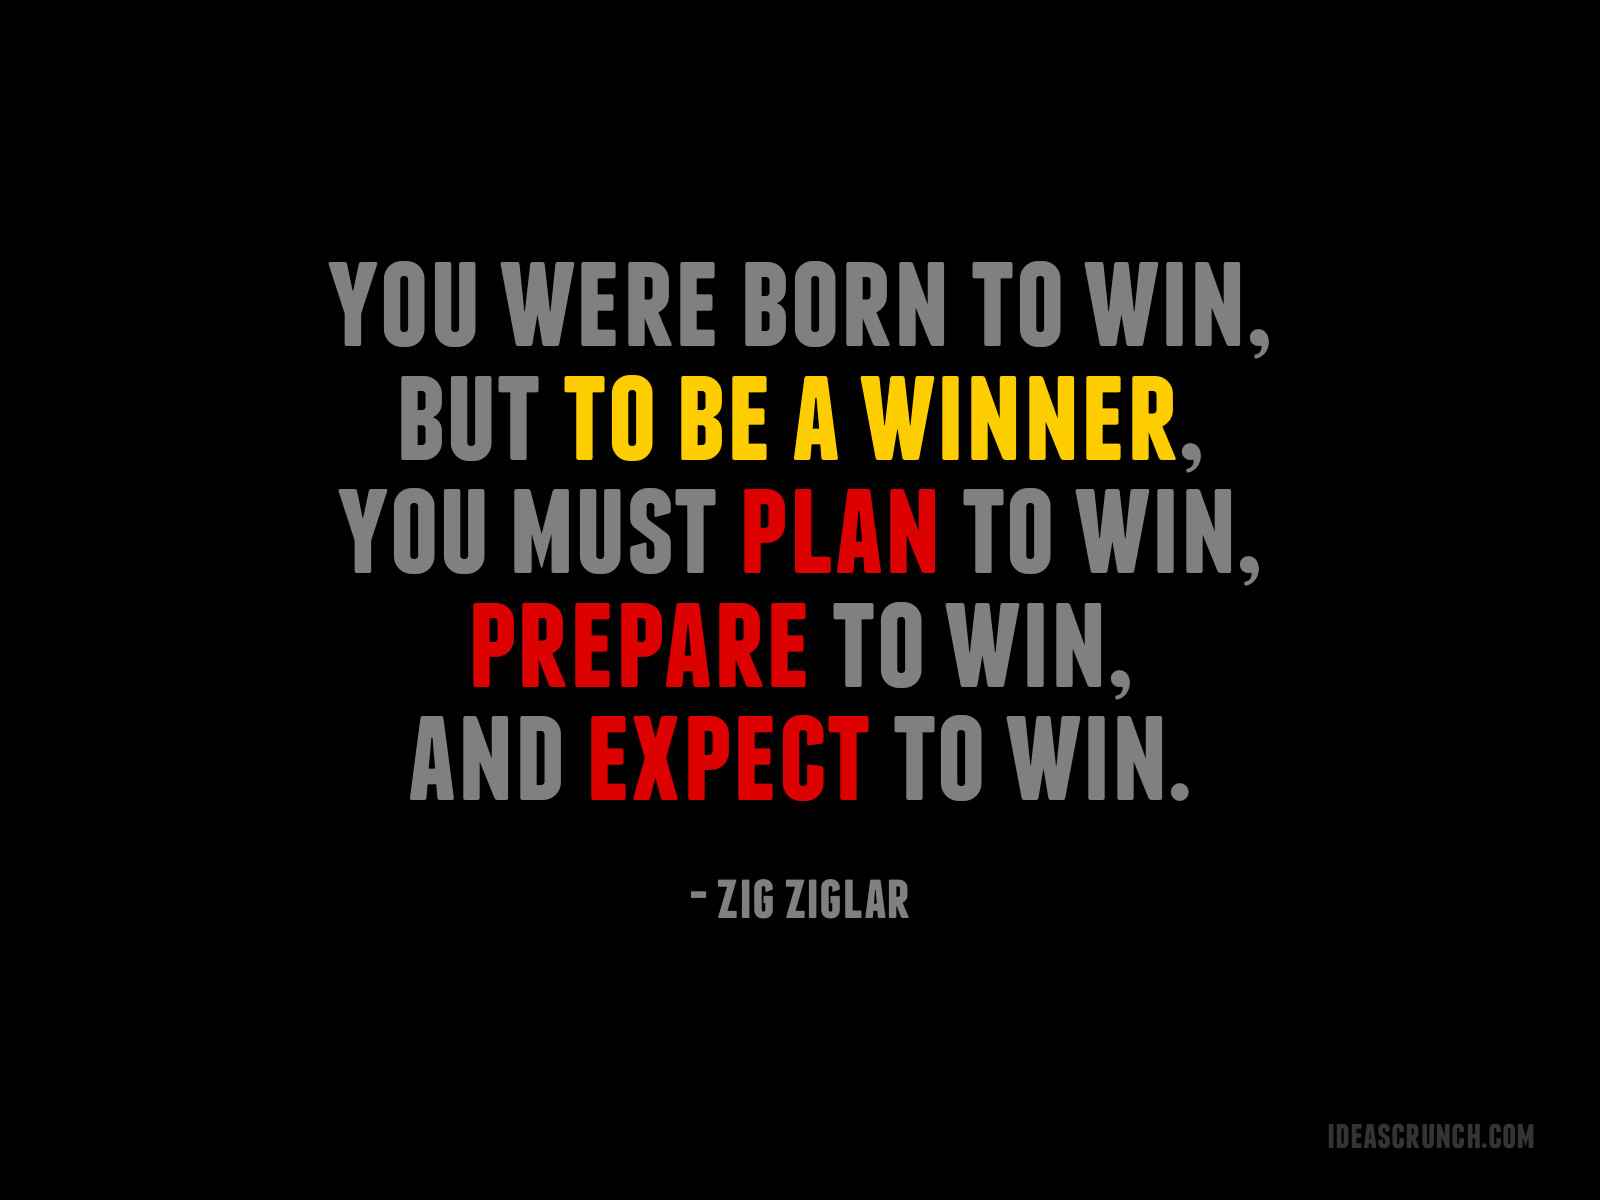 Winners Quotes Motivational
 Inspiring Business Quote You were born to win